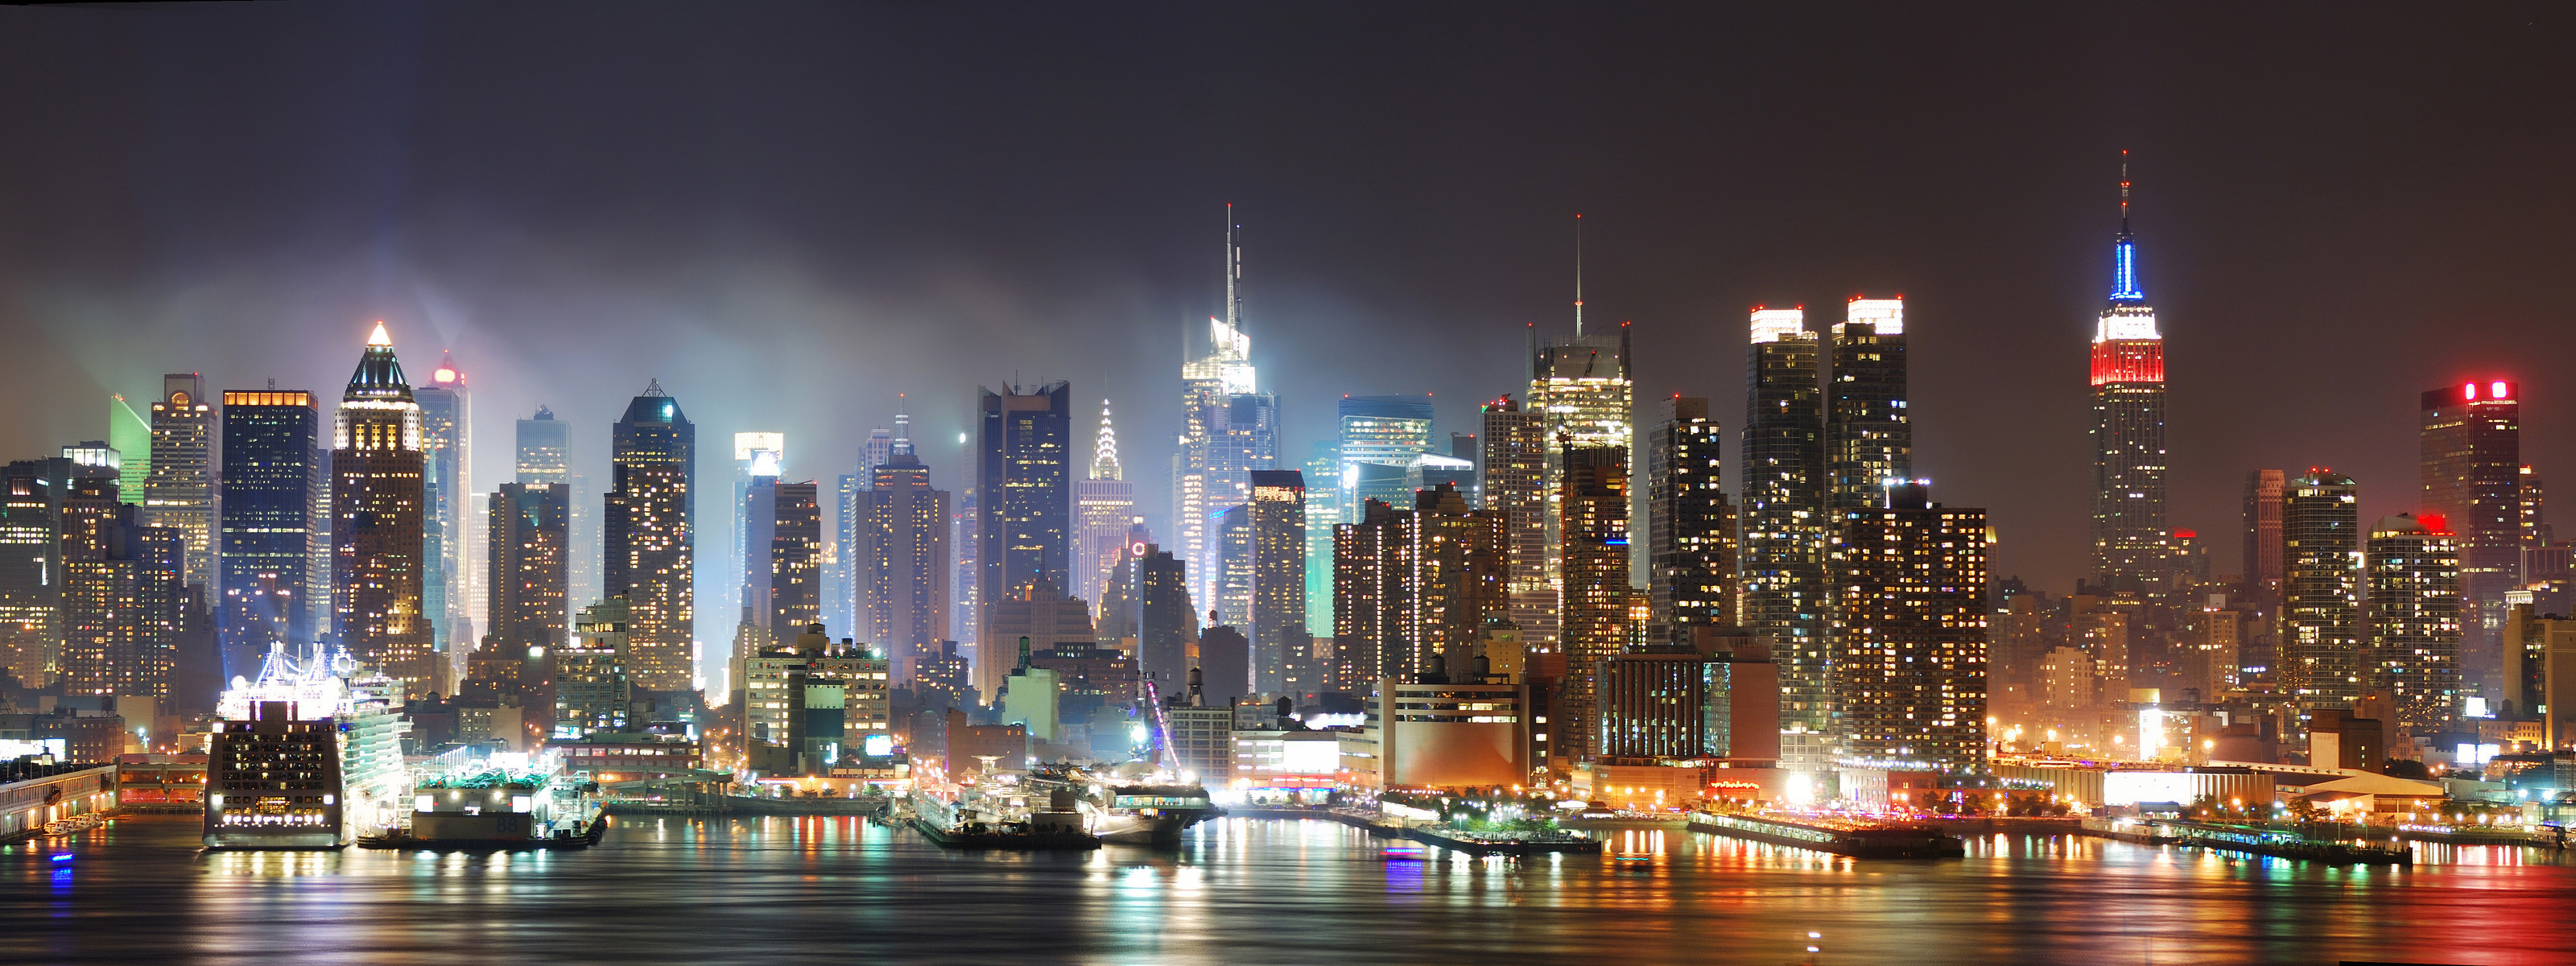 Manhattan skyline at night, featuring iconic buildings in New York City like the Empire State Building.